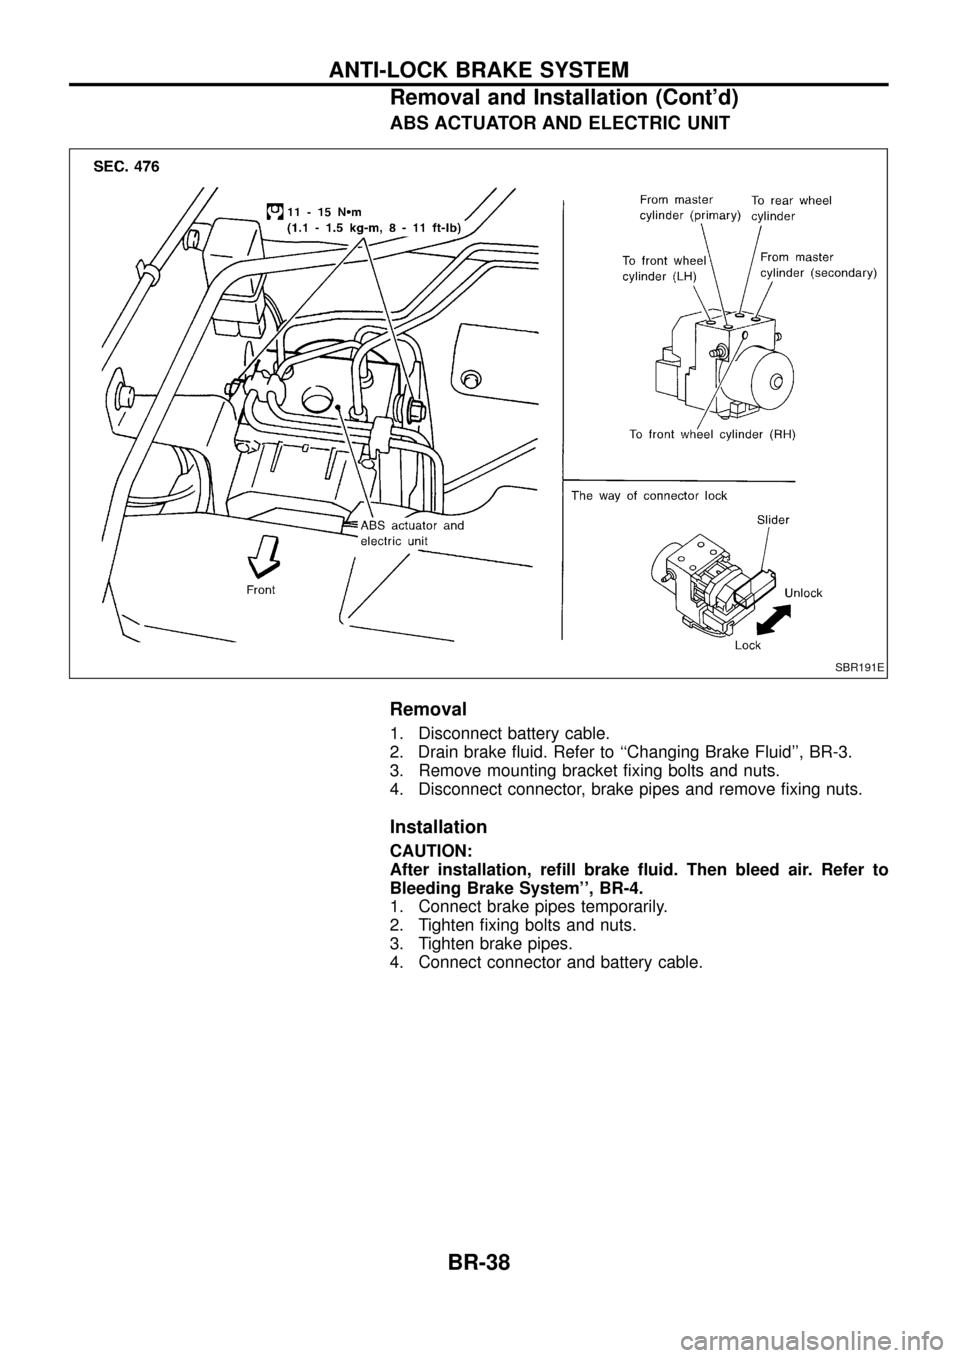 NISSAN PATROL 1998 Y61 / 5.G Brake System Workshop Manual ABS ACTUATOR AND ELECTRIC UNIT
Removal
1. Disconnect battery cable.
2. Drain brake ¯uid. Refer to ``Changing Brake Fluid, BR-3.
3. Remove mounting bracket ®xing bolts and nuts.
4. Disconnect conne